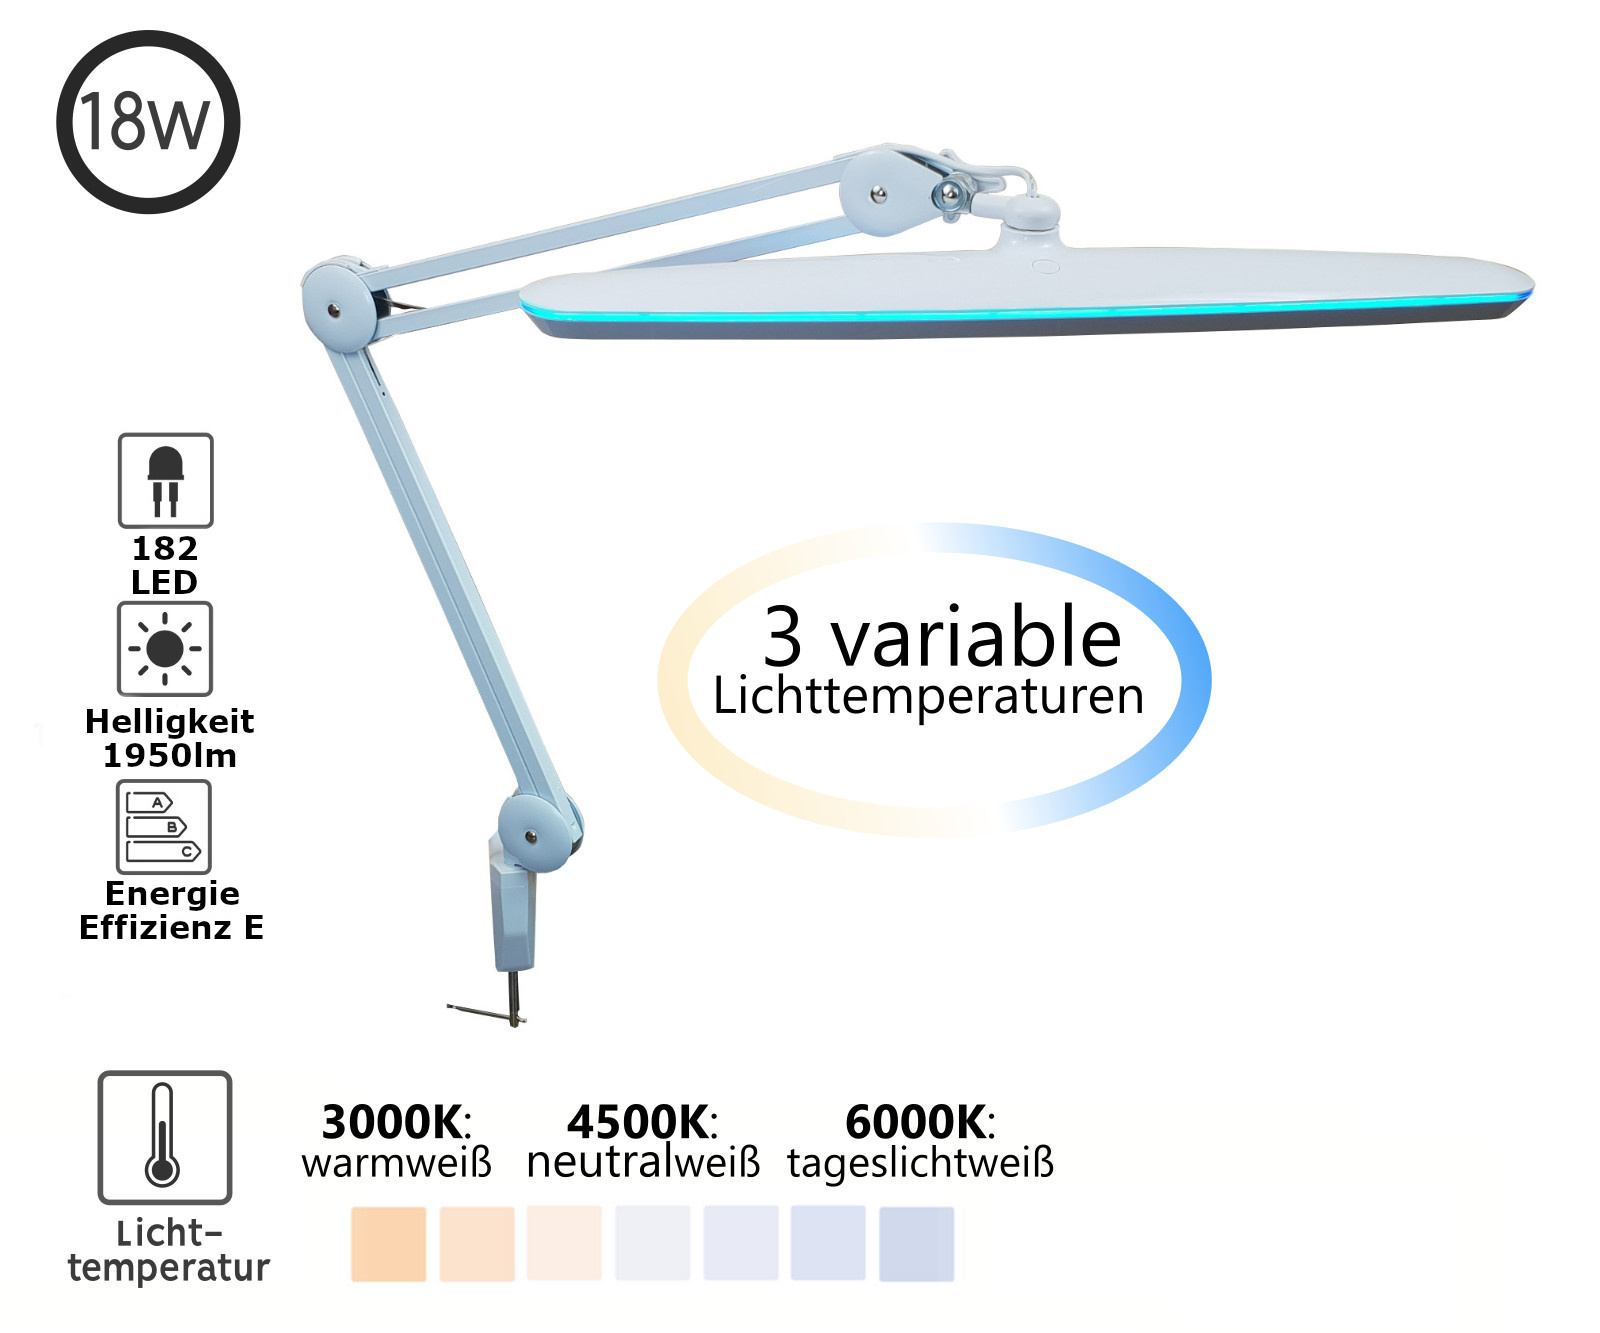 16,4W work lamp with variable light temperature 3000-6700k